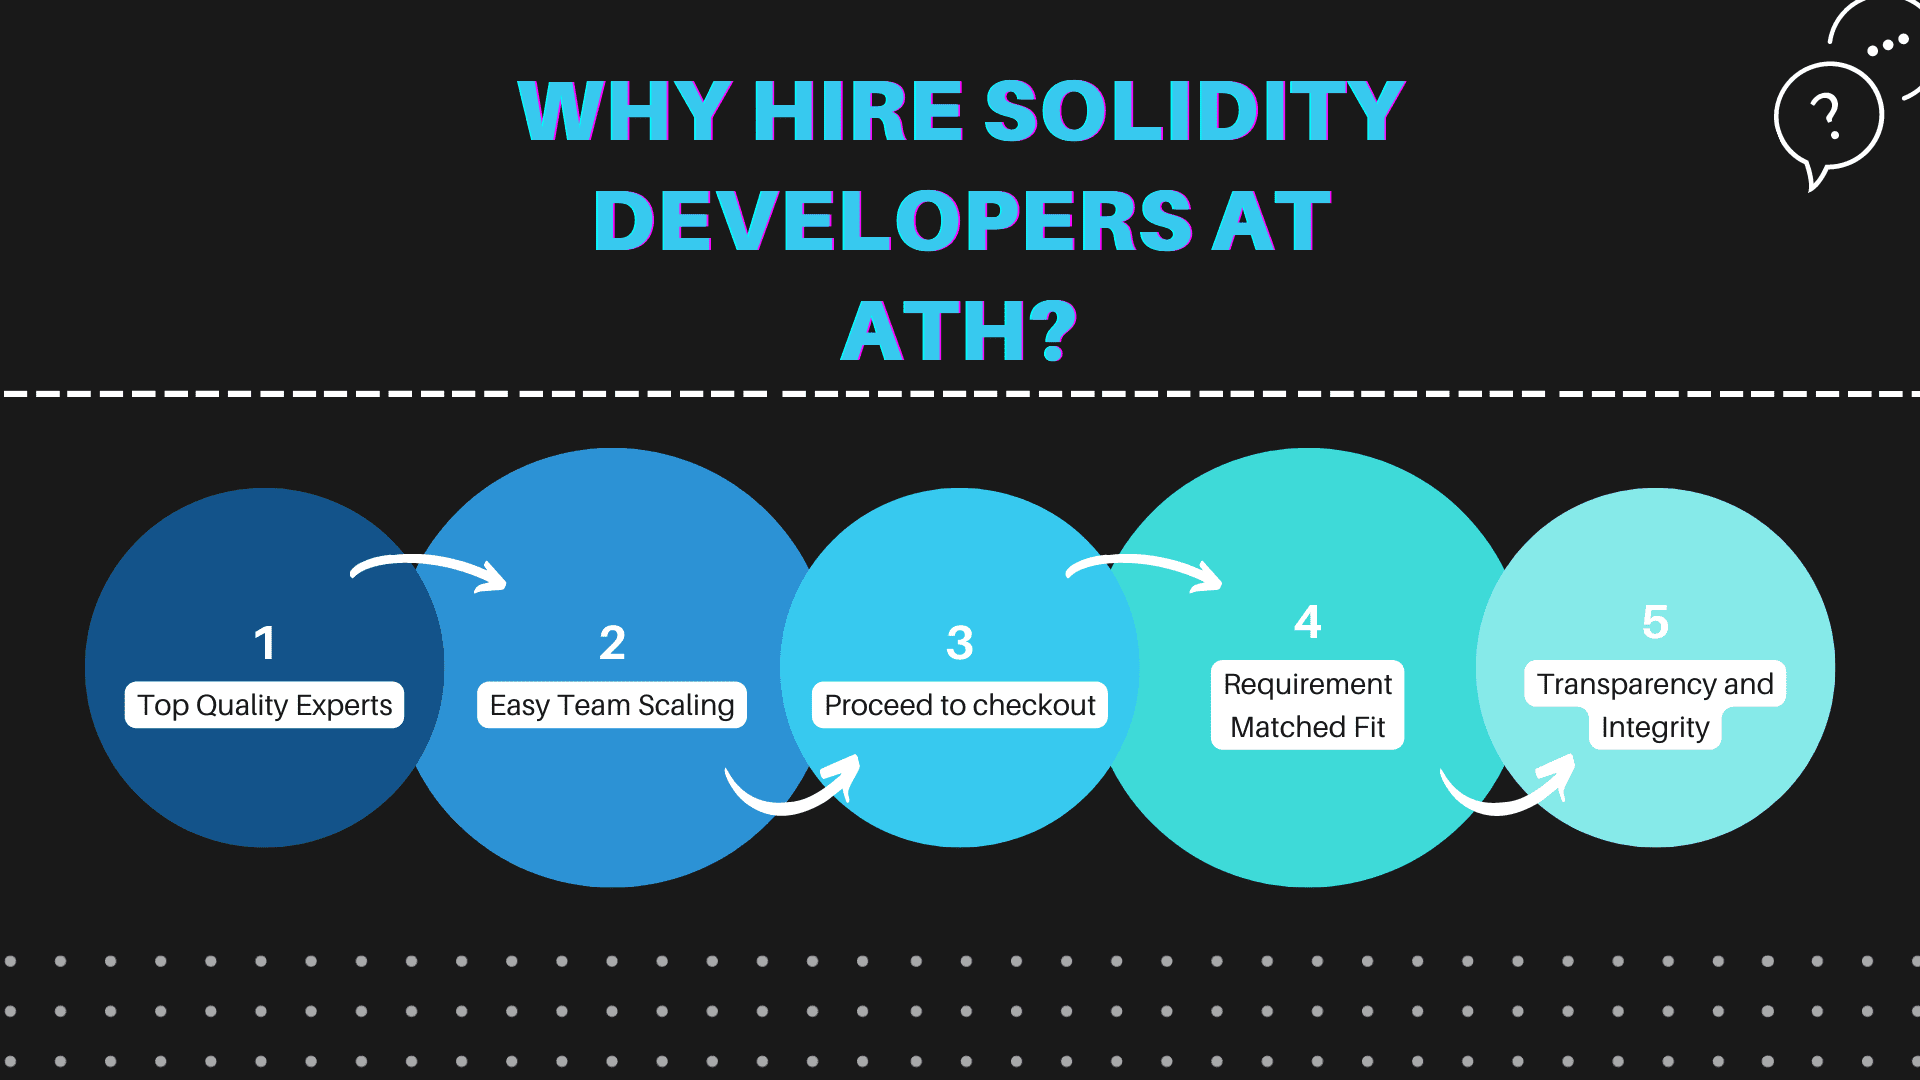 Why Hire Solidity Developers at ATH?